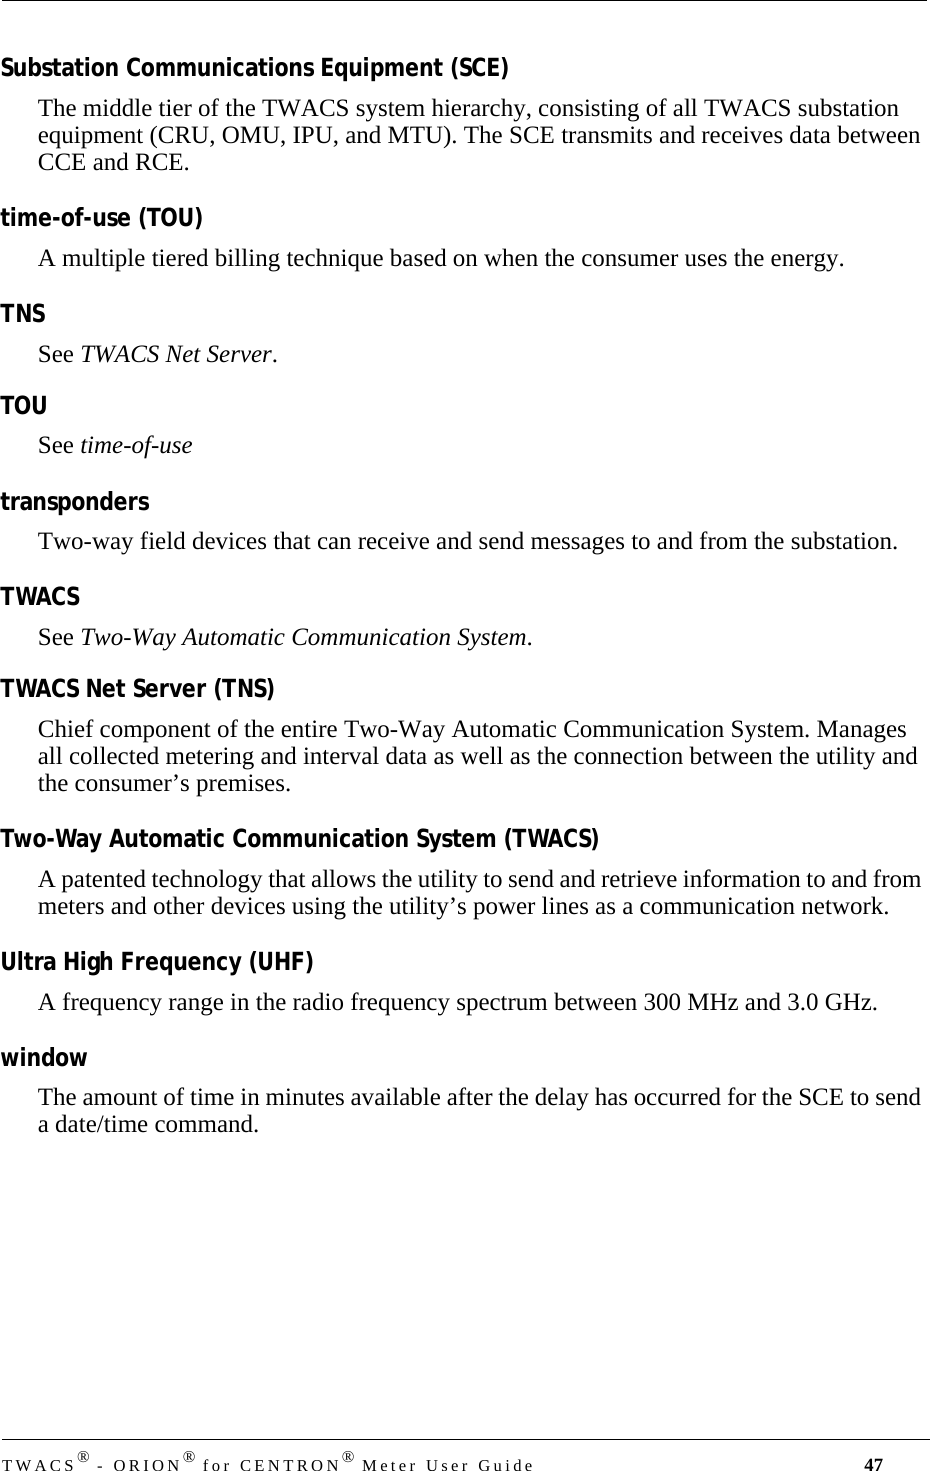 TWACS® - ORION® for CENTRON® Meter User Guide 47Substation Communications Equipment (SCE)The middle tier of the TWACS system hierarchy, consisting of all TWACS substation equipment (CRU, OMU, IPU, and MTU). The SCE transmits and receives data between CCE and RCE.time-of-use (TOU)A multiple tiered billing technique based on when the consumer uses the energy.TNSSee TWACS Net Server.TOUSee time-of-usetranspondersTwo-way field devices that can receive and send messages to and from the substation.TWACS See Two-Way Automatic Communication System.TWACS Net Server (TNS)Chief component of the entire Two-Way Automatic Communication System. Manages all collected metering and interval data as well as the connection between the utility and the consumer’s premises.Two-Way Automatic Communication System (TWACS)A patented technology that allows the utility to send and retrieve information to and from meters and other devices using the utility’s power lines as a communication network.Ultra High Frequency (UHF)A frequency range in the radio frequency spectrum between 300 MHz and 3.0 GHz.windowThe amount of time in minutes available after the delay has occurred for the SCE to send a date/time command.